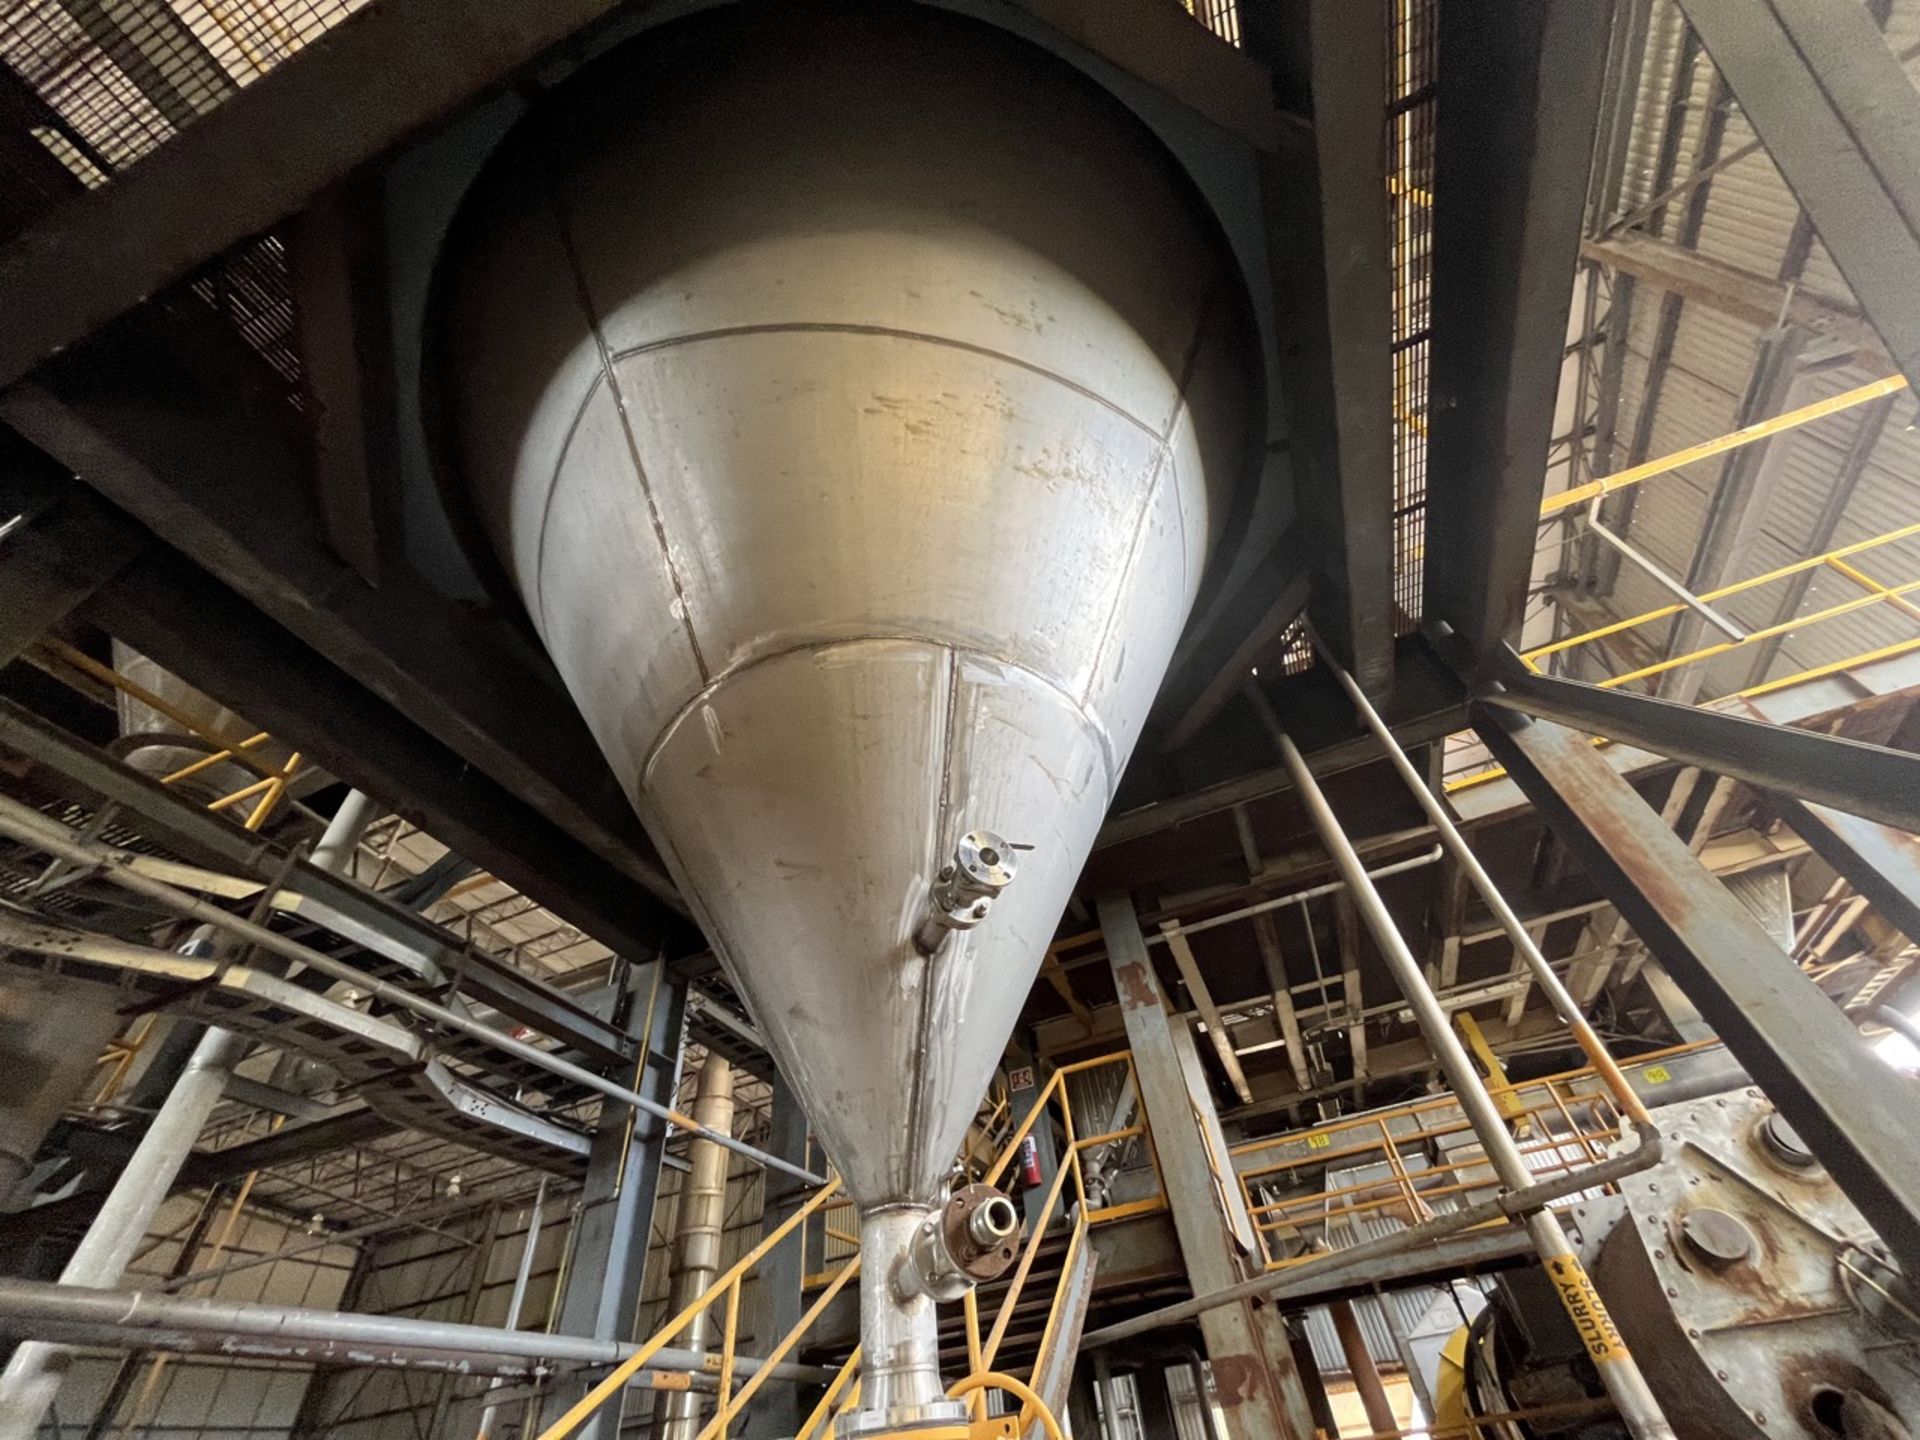 Conical storage tank with stainless steel toriesferica lid measures approximately 4.30 meters in di - Image 15 of 37